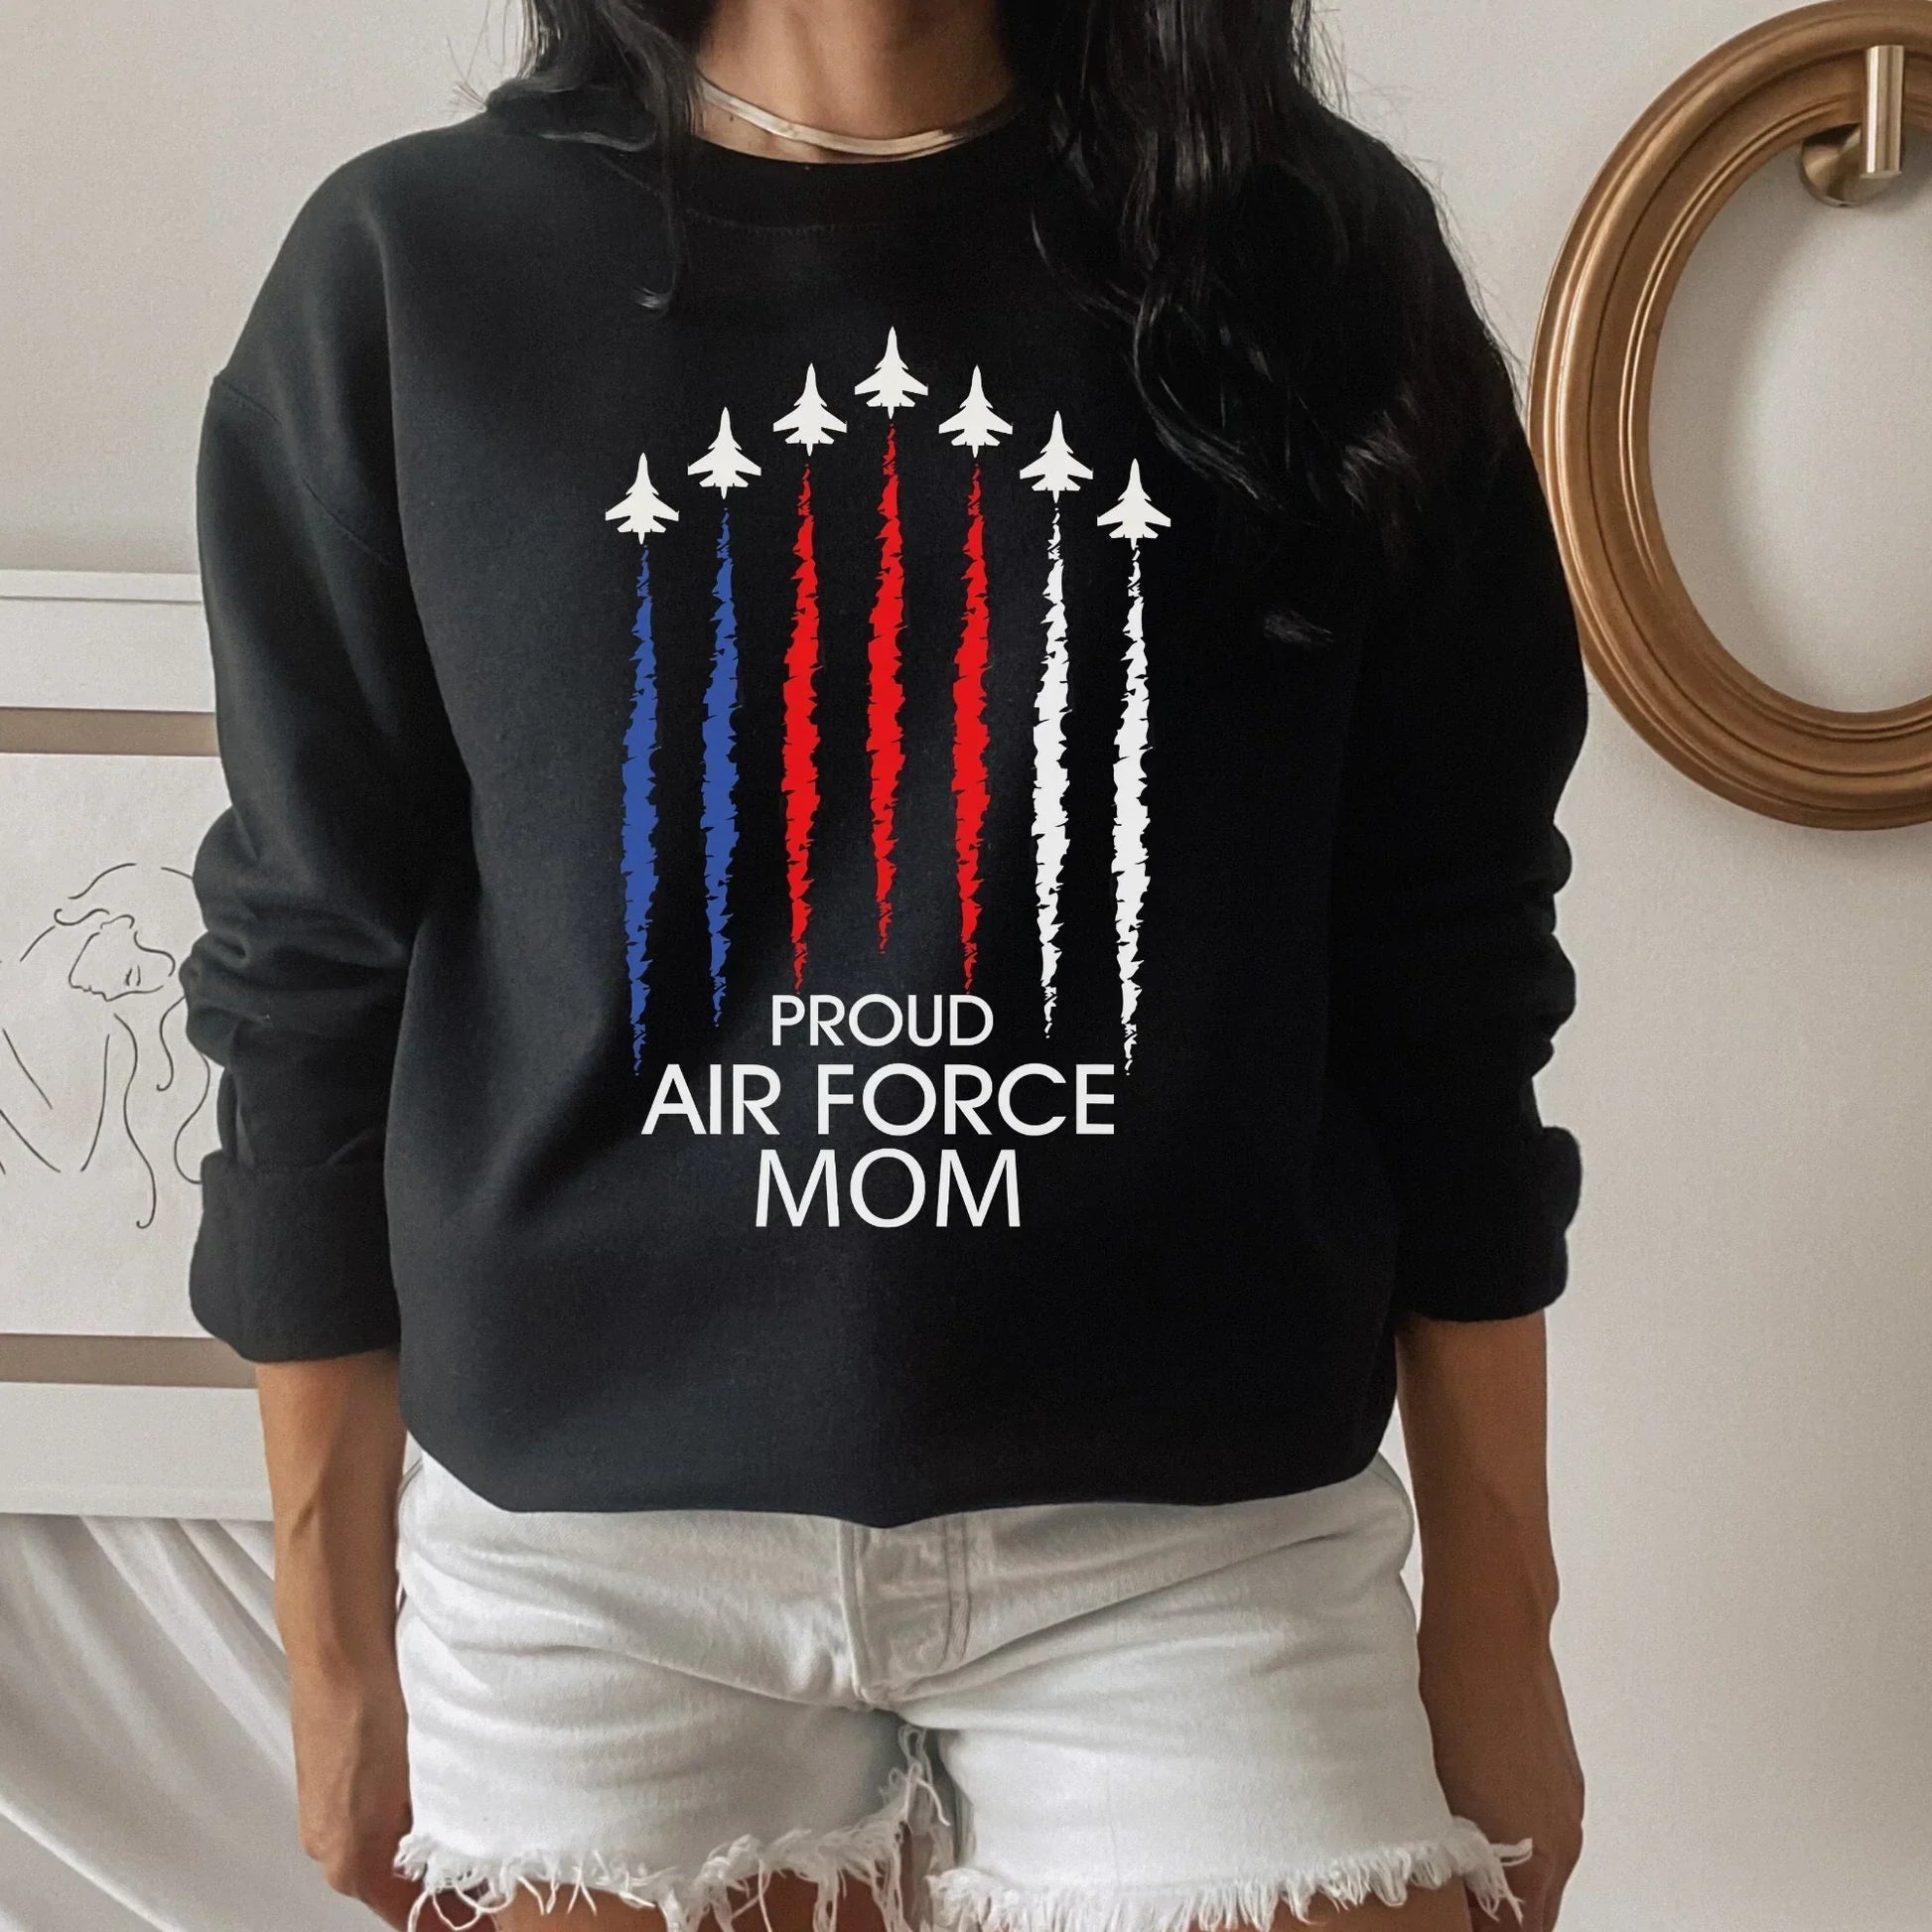 Air Force Mom Shirt, Air force Wife Tee, Military Mom T-Shirt, Military Wife Sweatshirt, Mom Gift, Support our troops, USAF Mom, Homecoming